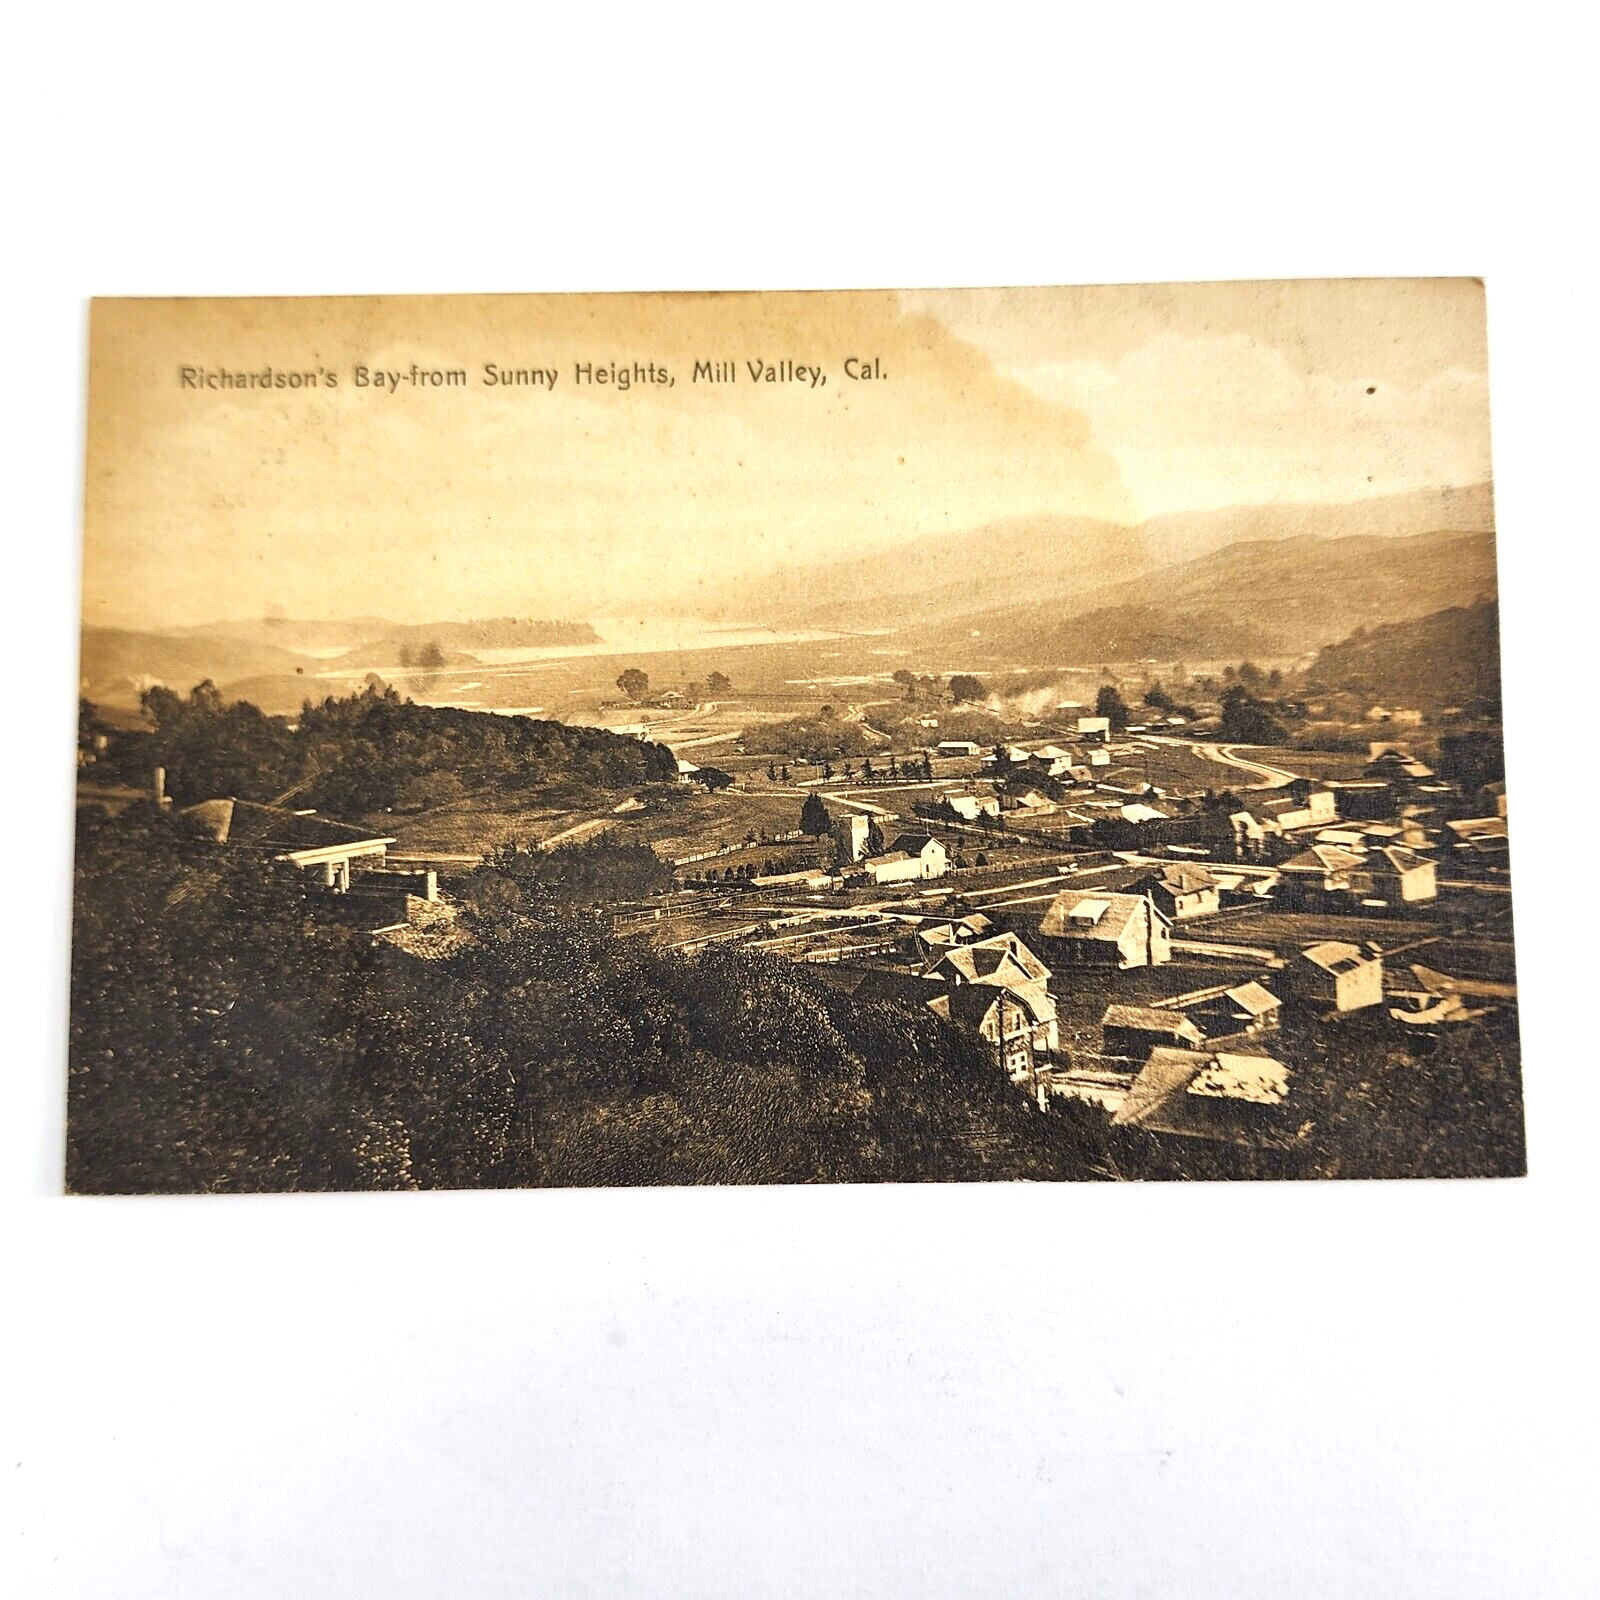 Vintage View Mill Valley California Richardson's Bay from Sunny Heights Postcard